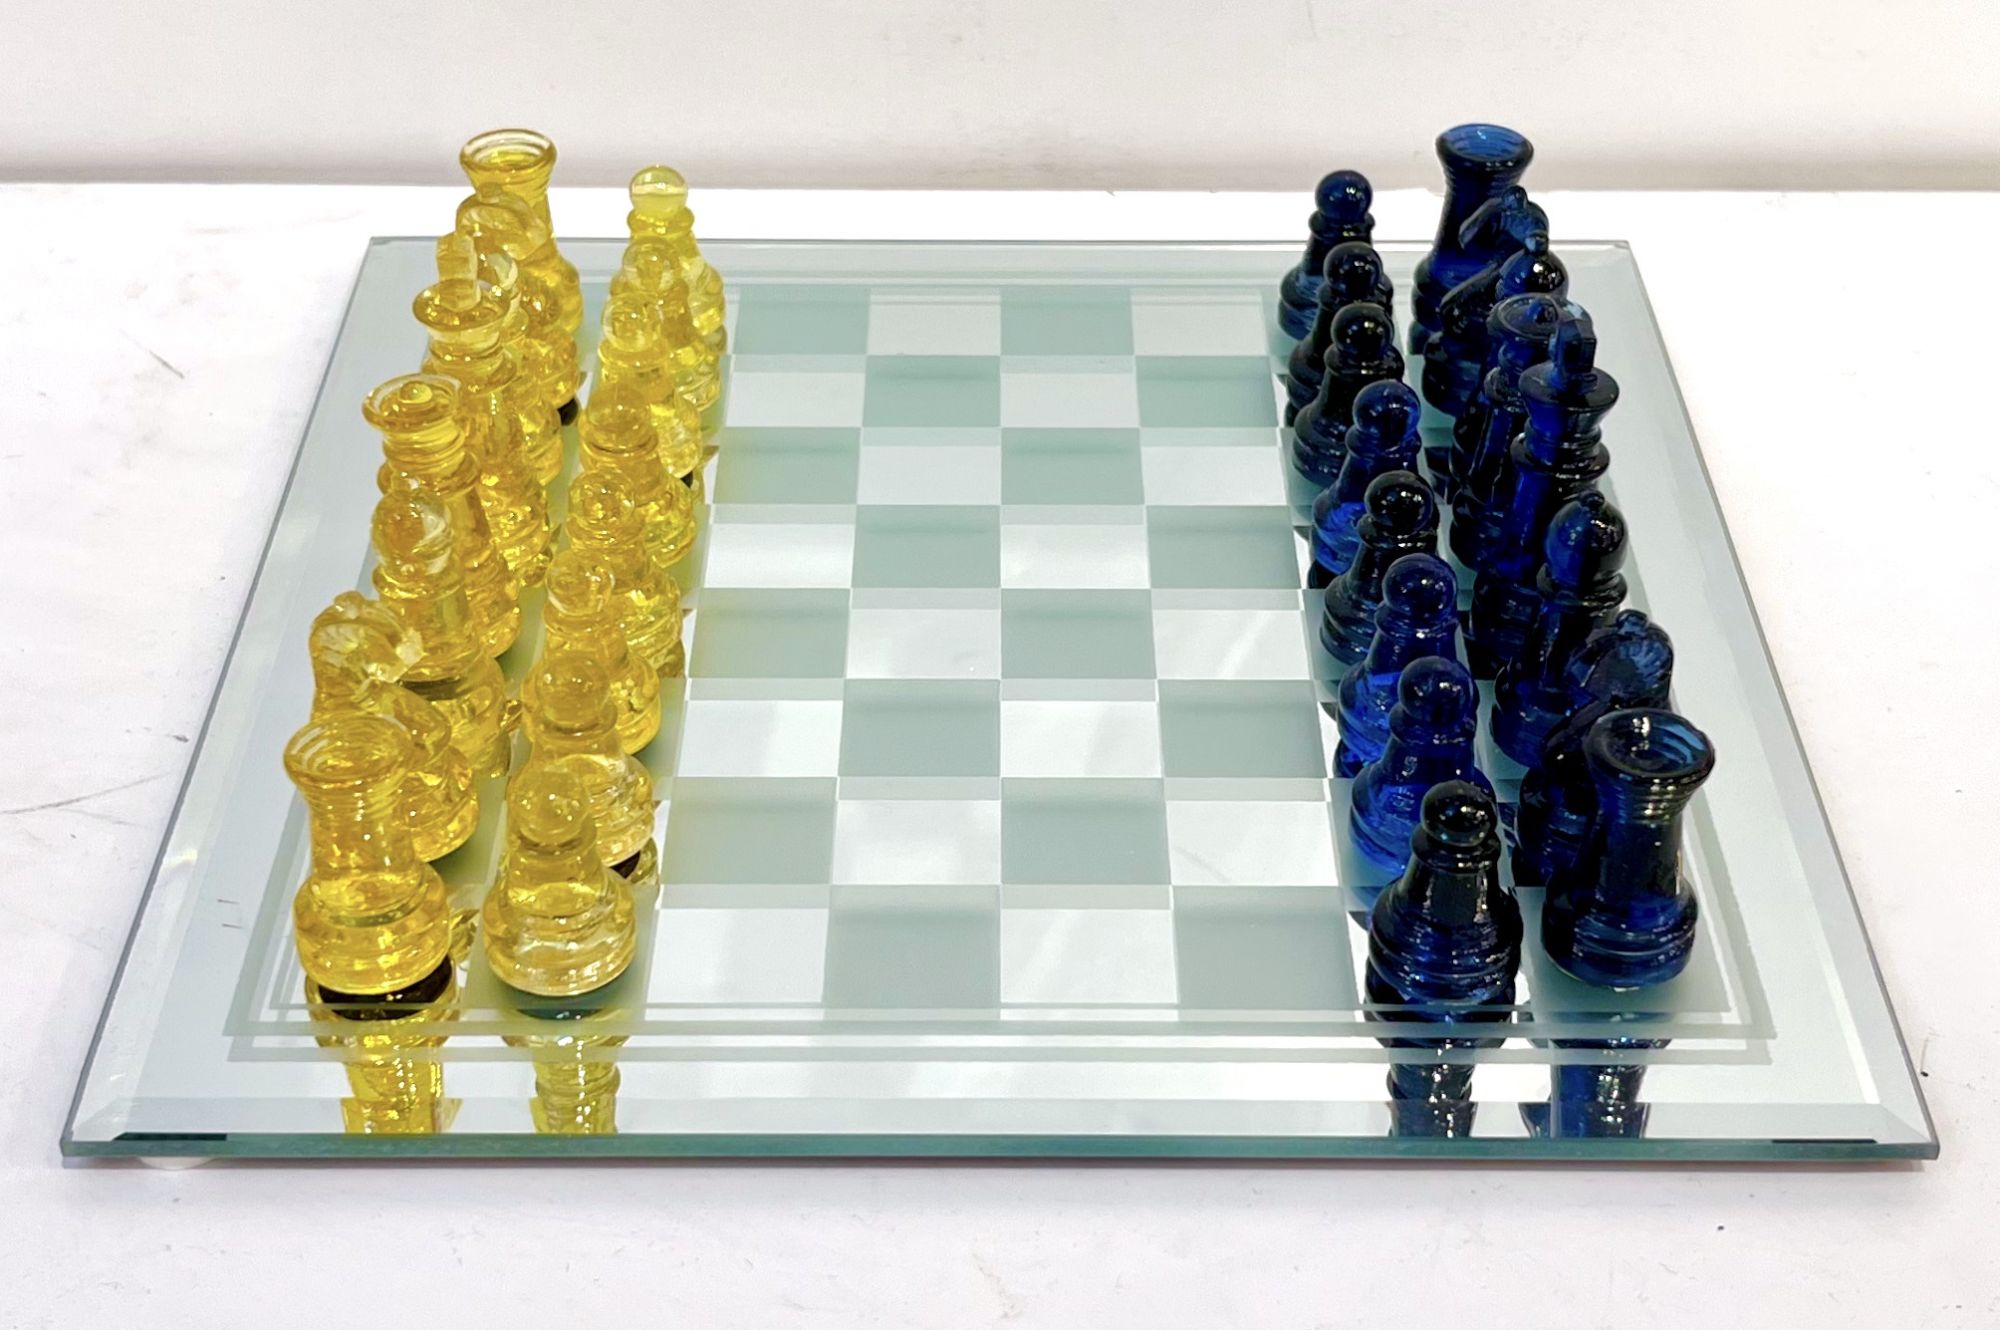 Cristal Arte - Cristal Art Glass Table with Chess Board and Musical Motif,  circa 1955